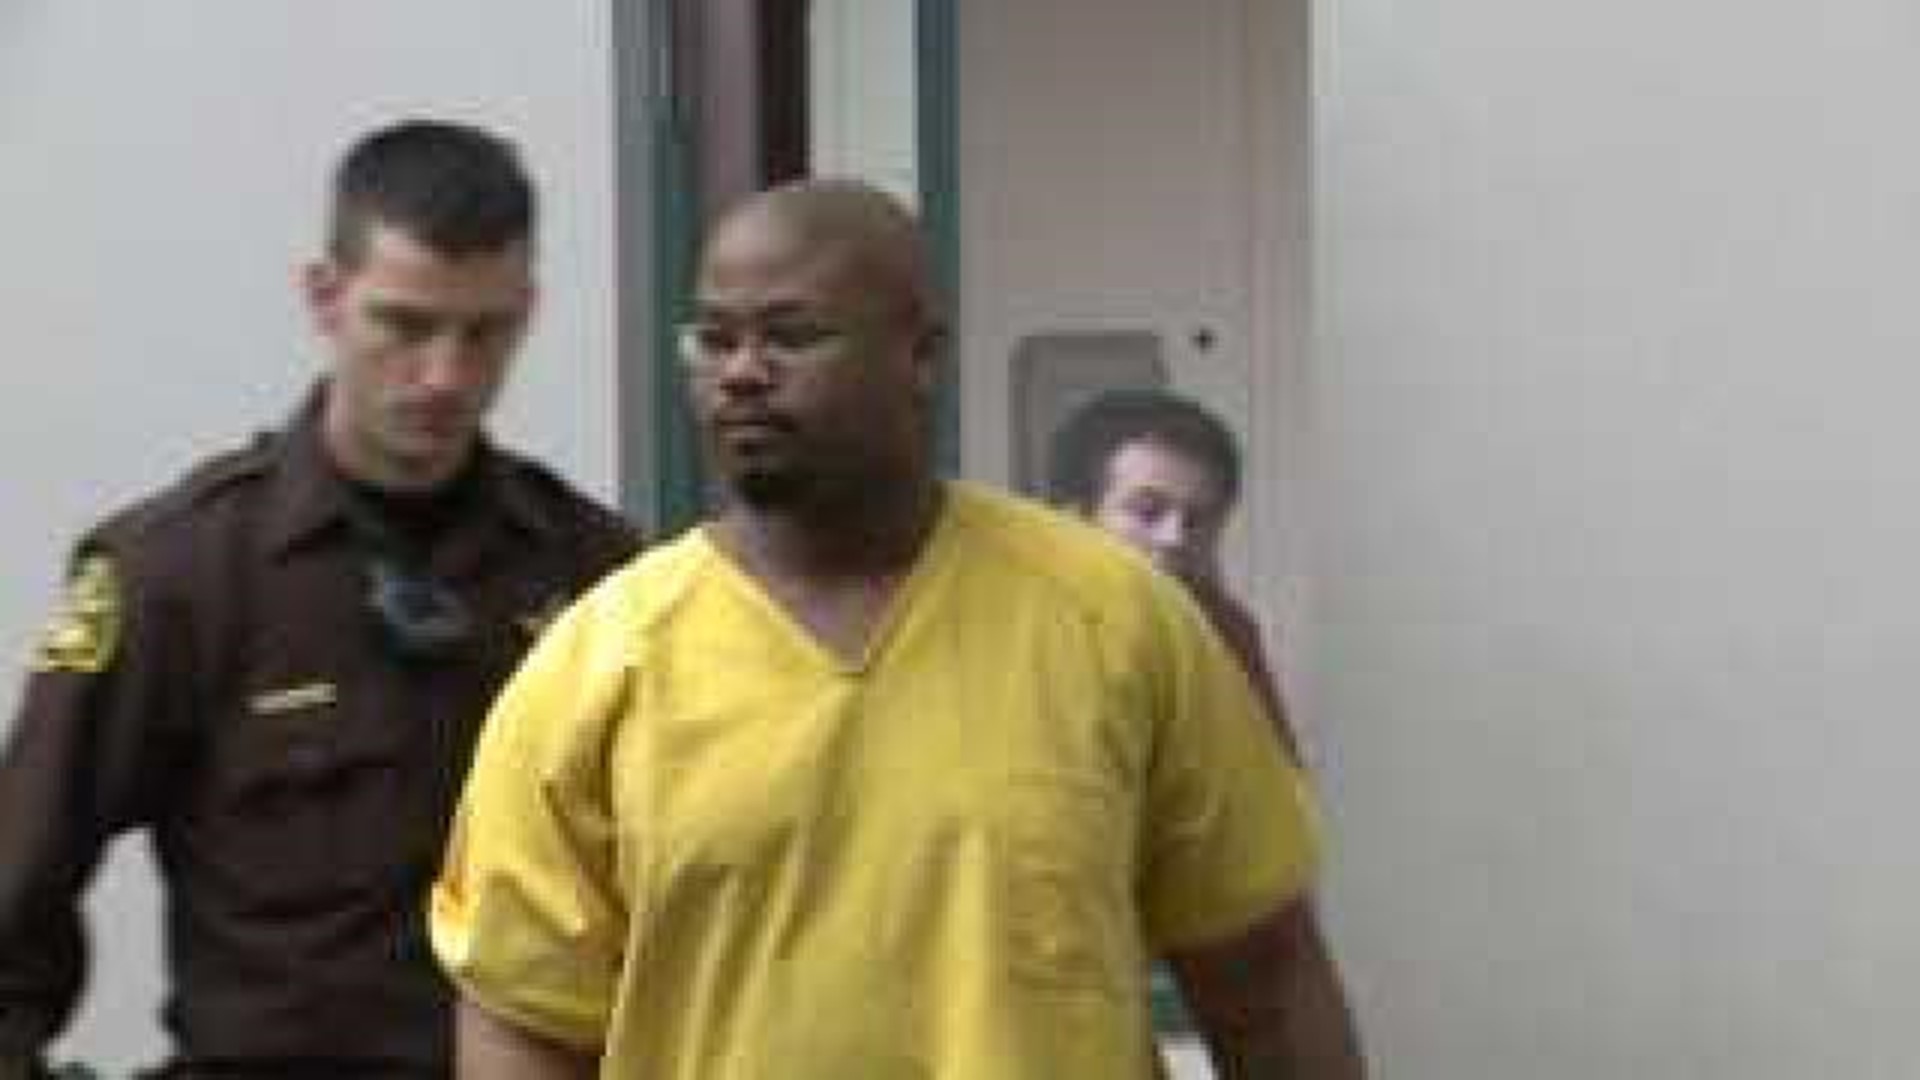 Convicted killer sentenced to 50 years in prison